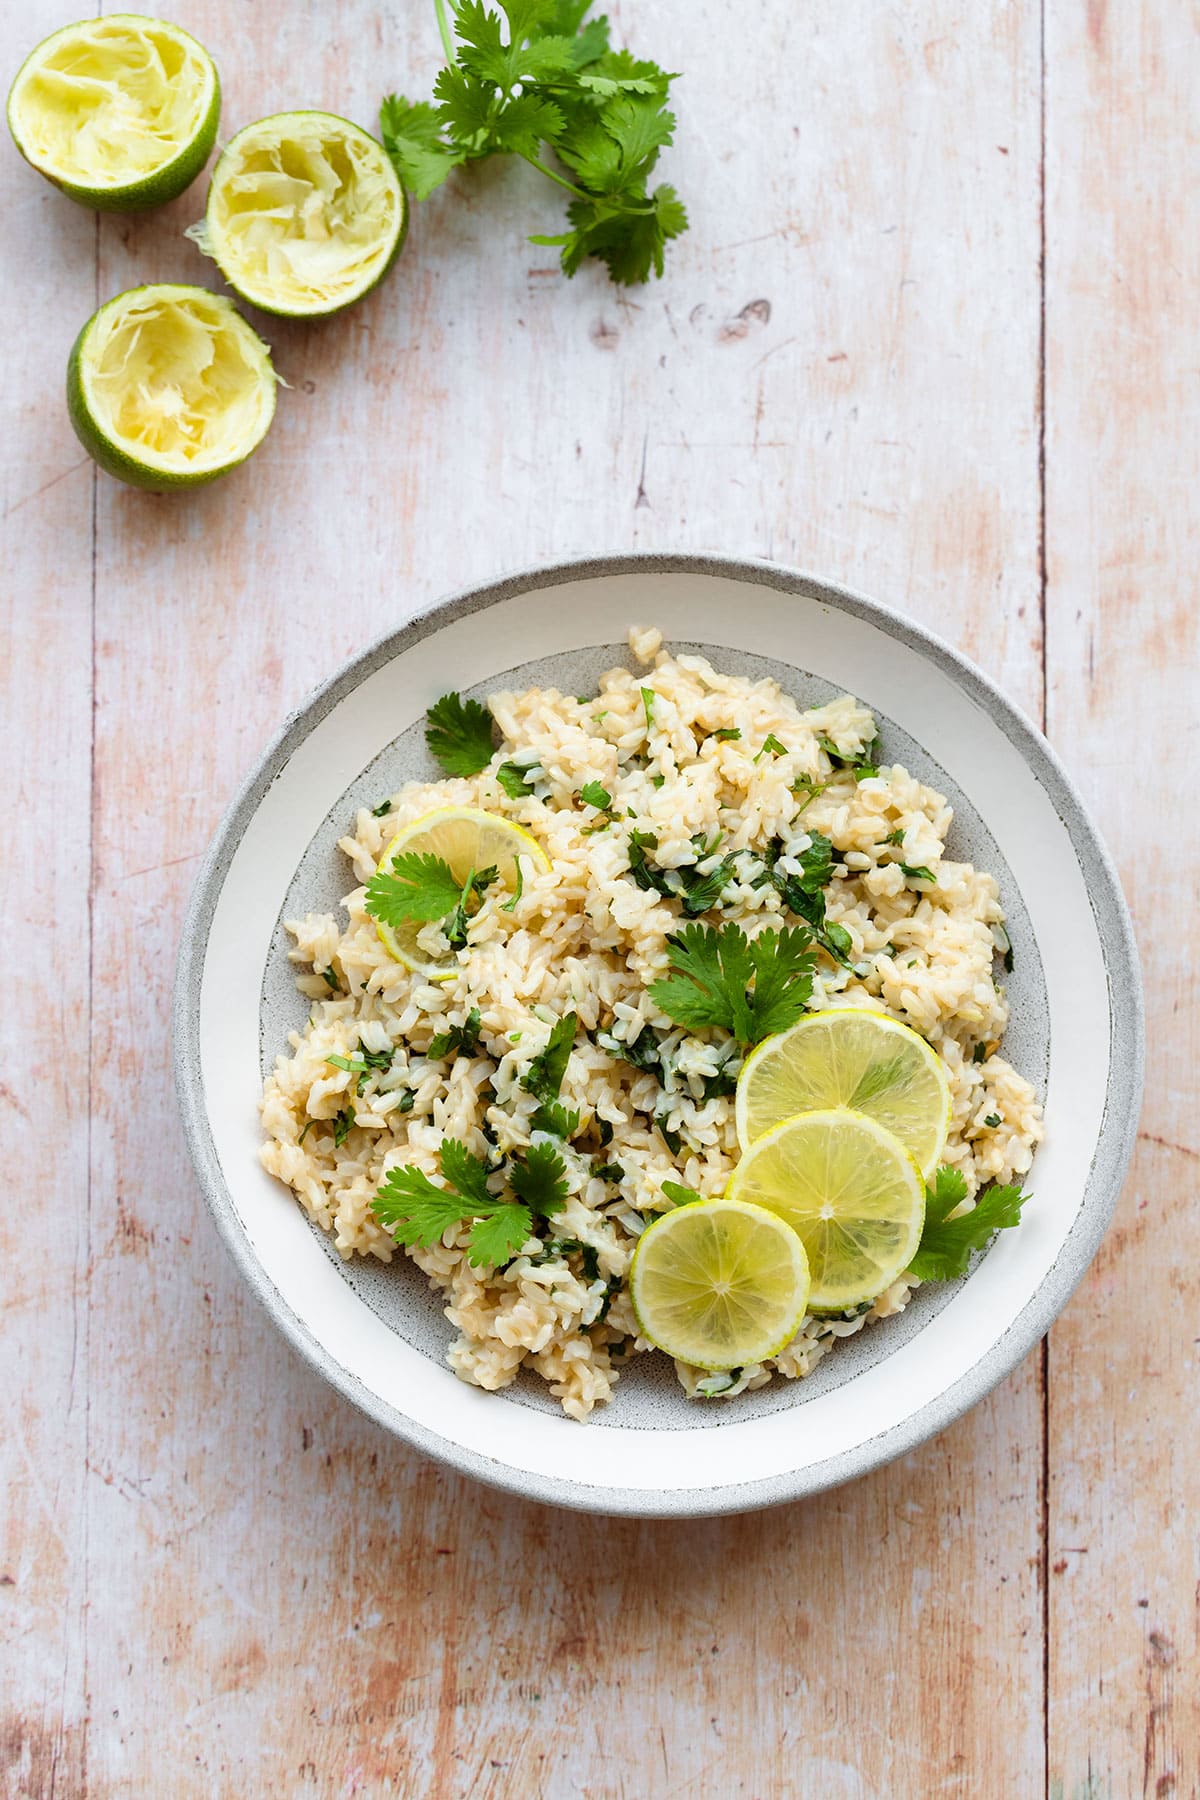 A photo of brown rice with cilantro and lime, decorated with lime slices. In a grey bowl with a white rim on a light wooden background. Juiced lime and fresh cilantro in the left top corner.